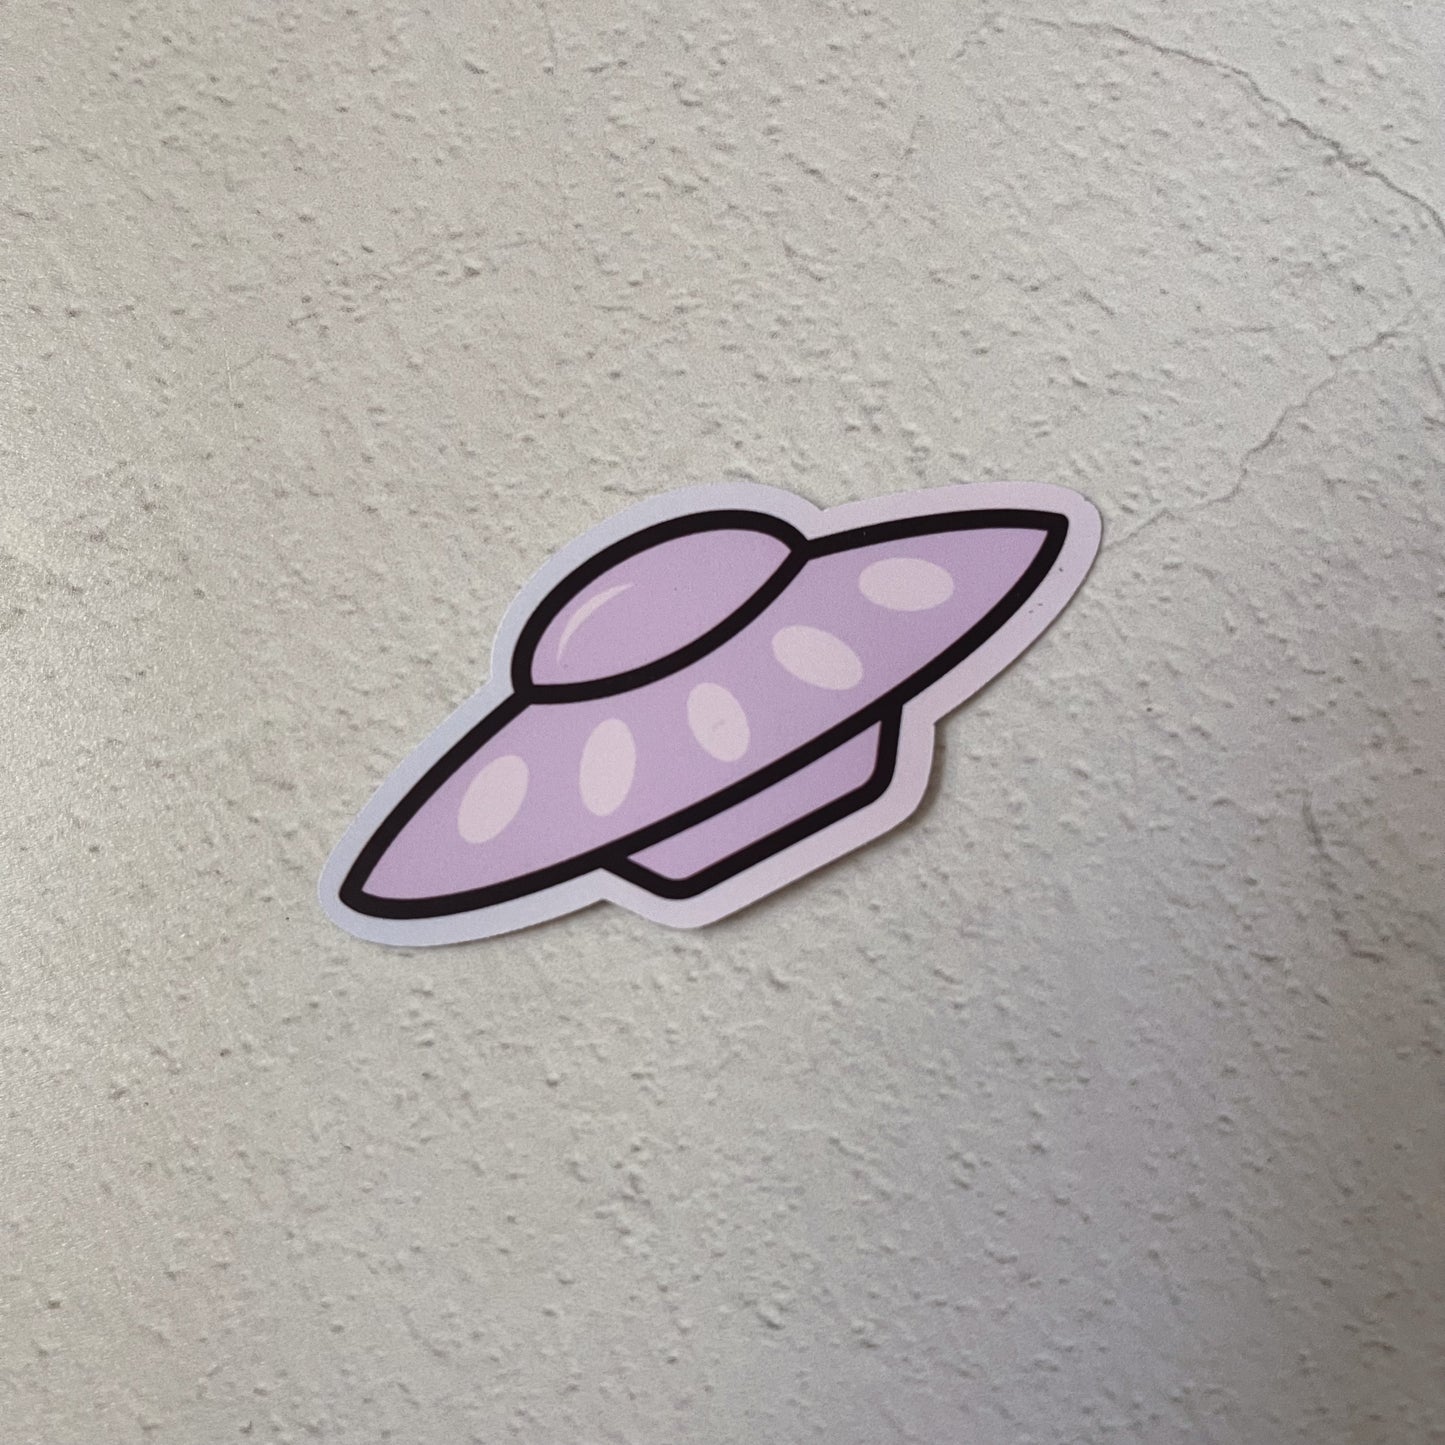 ✦NEW✦ "Out Of This World" HPC x NDD Diecut Stickers